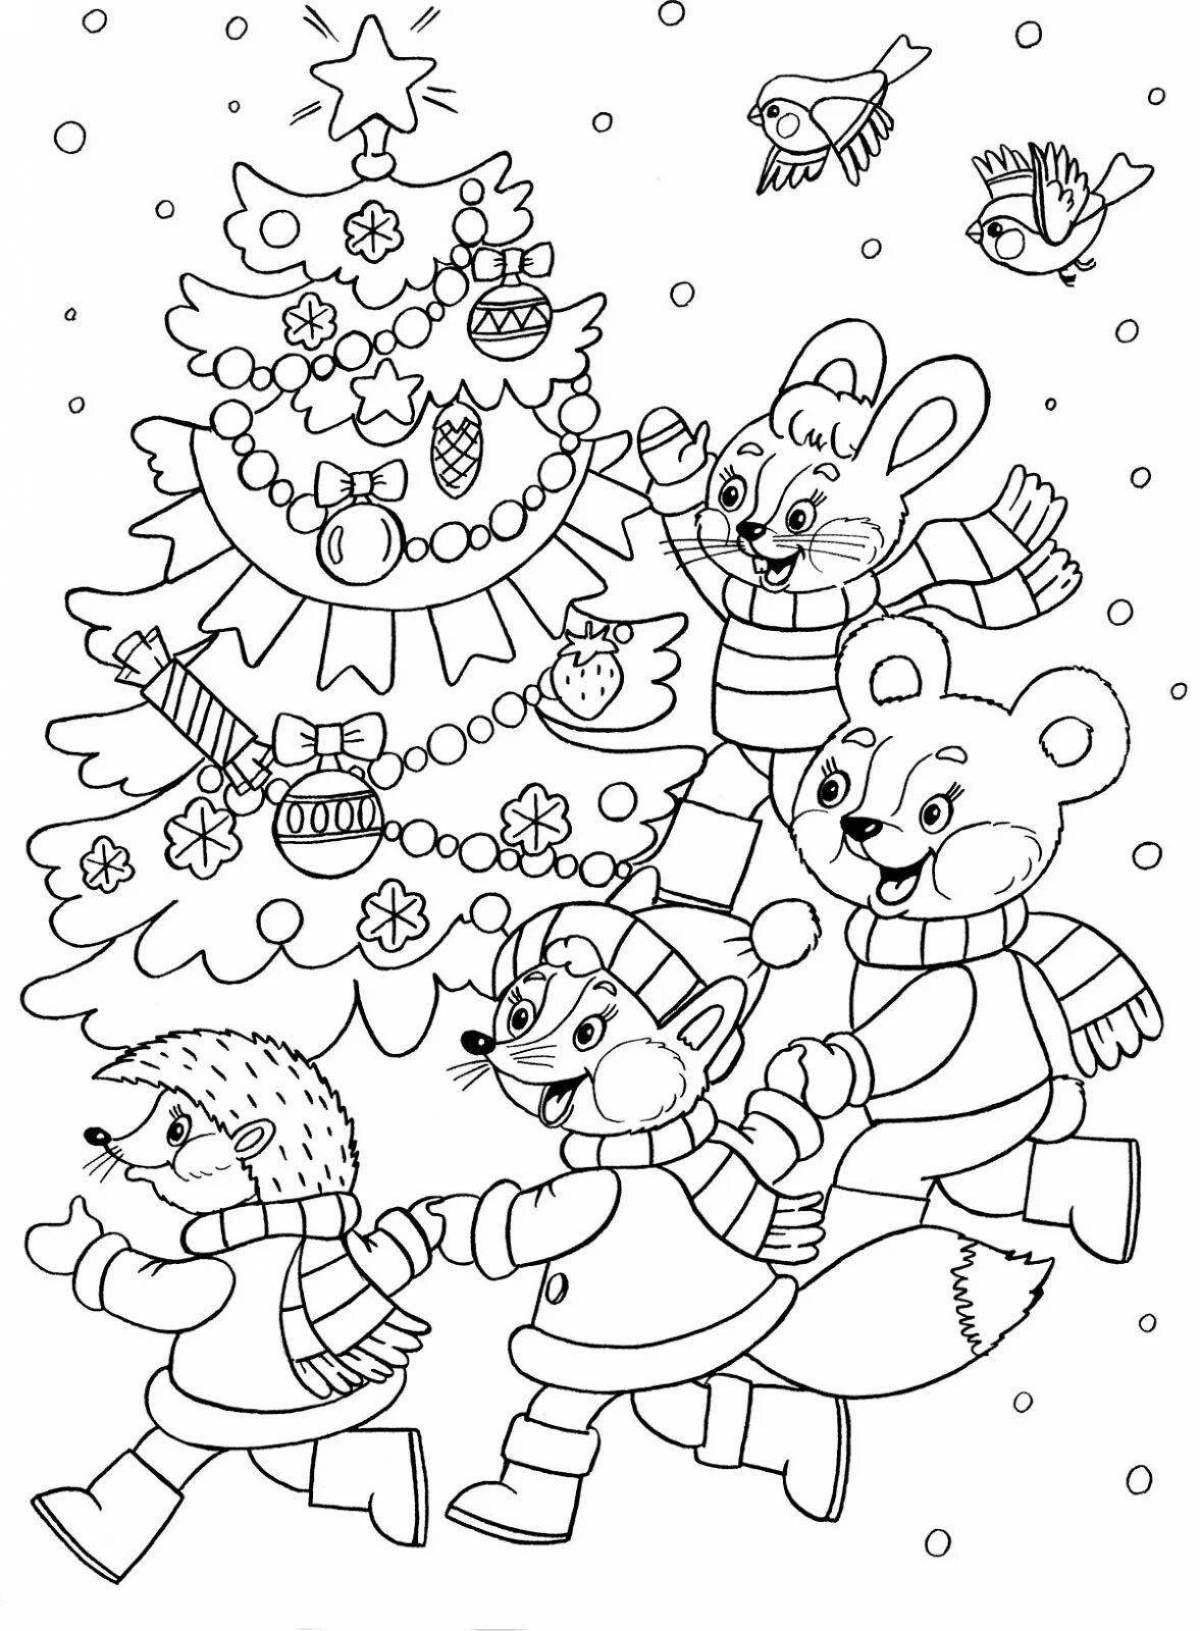 Inspirational Christmas coloring book for kids 6-7 years old